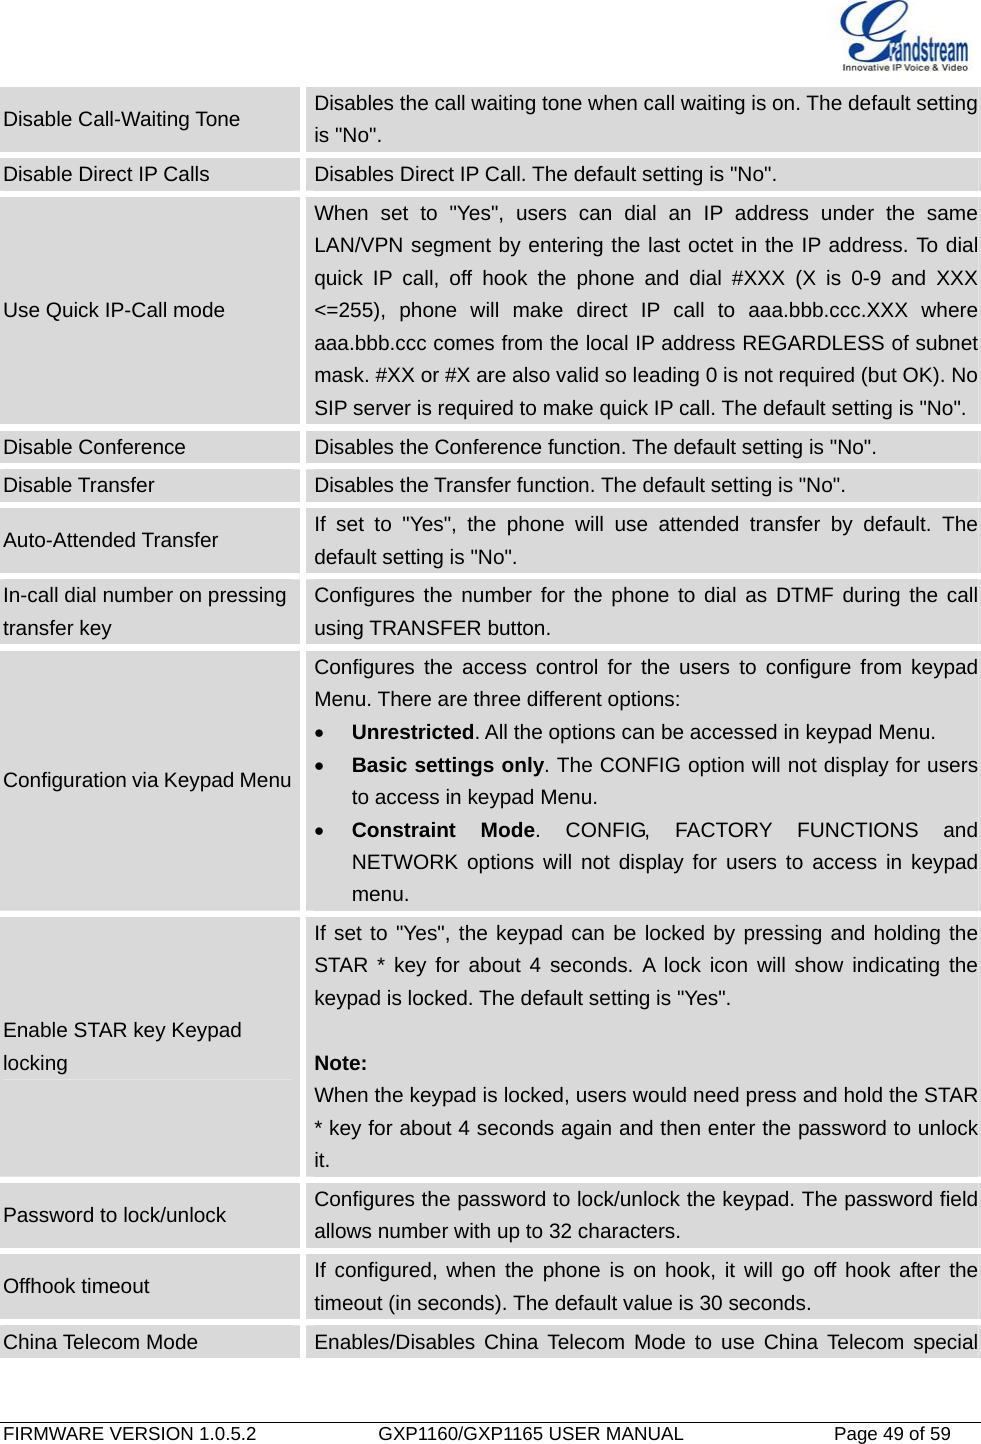   FIRMWARE VERSION 1.0.5.2             GXP1160/GXP1165 USER MANUAL           Page 49 of 59                                   Disable Call-Waiting Tone  Disables the call waiting tone when call waiting is on. The default setting is &quot;No&quot;. Disable Direct IP Calls  Disables Direct IP Call. The default setting is &quot;No&quot;. Use Quick IP-Call mode When set to &quot;Yes&quot;, users can dial an IP address under the same LAN/VPN segment by entering the last octet in the IP address. To dial quick IP call, off hook the phone and dial #XXX (X is 0-9 and XXX &lt;=255), phone will make direct IP call to aaa.bbb.ccc.XXX where aaa.bbb.ccc comes from the local IP address REGARDLESS of subnet mask. #XX or #X are also valid so leading 0 is not required (but OK). No SIP server is required to make quick IP call. The default setting is &quot;No&quot;. Disable Conference  Disables the Conference function. The default setting is &quot;No&quot;. Disable Transfer  Disables the Transfer function. The default setting is &quot;No&quot;. Auto-Attended Transfer  If set to &quot;Yes&quot;, the phone will use attended transfer by default. The default setting is &quot;No&quot;. In-call dial number on pressing transfer key Configures the number for the phone to dial as DTMF during the call using TRANSFER button. Configuration via Keypad Menu Configures the access control for the users to configure from keypad Menu. There are three different options:  Unrestricted. All the options can be accessed in keypad Menu.  Basic settings only. The CONFIG option will not display for users to access in keypad Menu.  Constraint Mode. CONFIG, FACTORY FUNCTIONS and NETWORK options will not display for users to access in keypad menu. Enable STAR key Keypad locking If set to &quot;Yes&quot;, the keypad can be locked by pressing and holding the STAR * key for about 4 seconds. A lock icon will show indicating the keypad is locked. The default setting is &quot;Yes&quot;.  Note: When the keypad is locked, users would need press and hold the STAR * key for about 4 seconds again and then enter the password to unlock it. Password to lock/unlock  Configures the password to lock/unlock the keypad. The password field allows number with up to 32 characters. Offhook timeout  If configured, when the phone is on hook, it will go off hook after the timeout (in seconds). The default value is 30 seconds. China Telecom Mode  Enables/Disables China Telecom Mode to use China Telecom special 